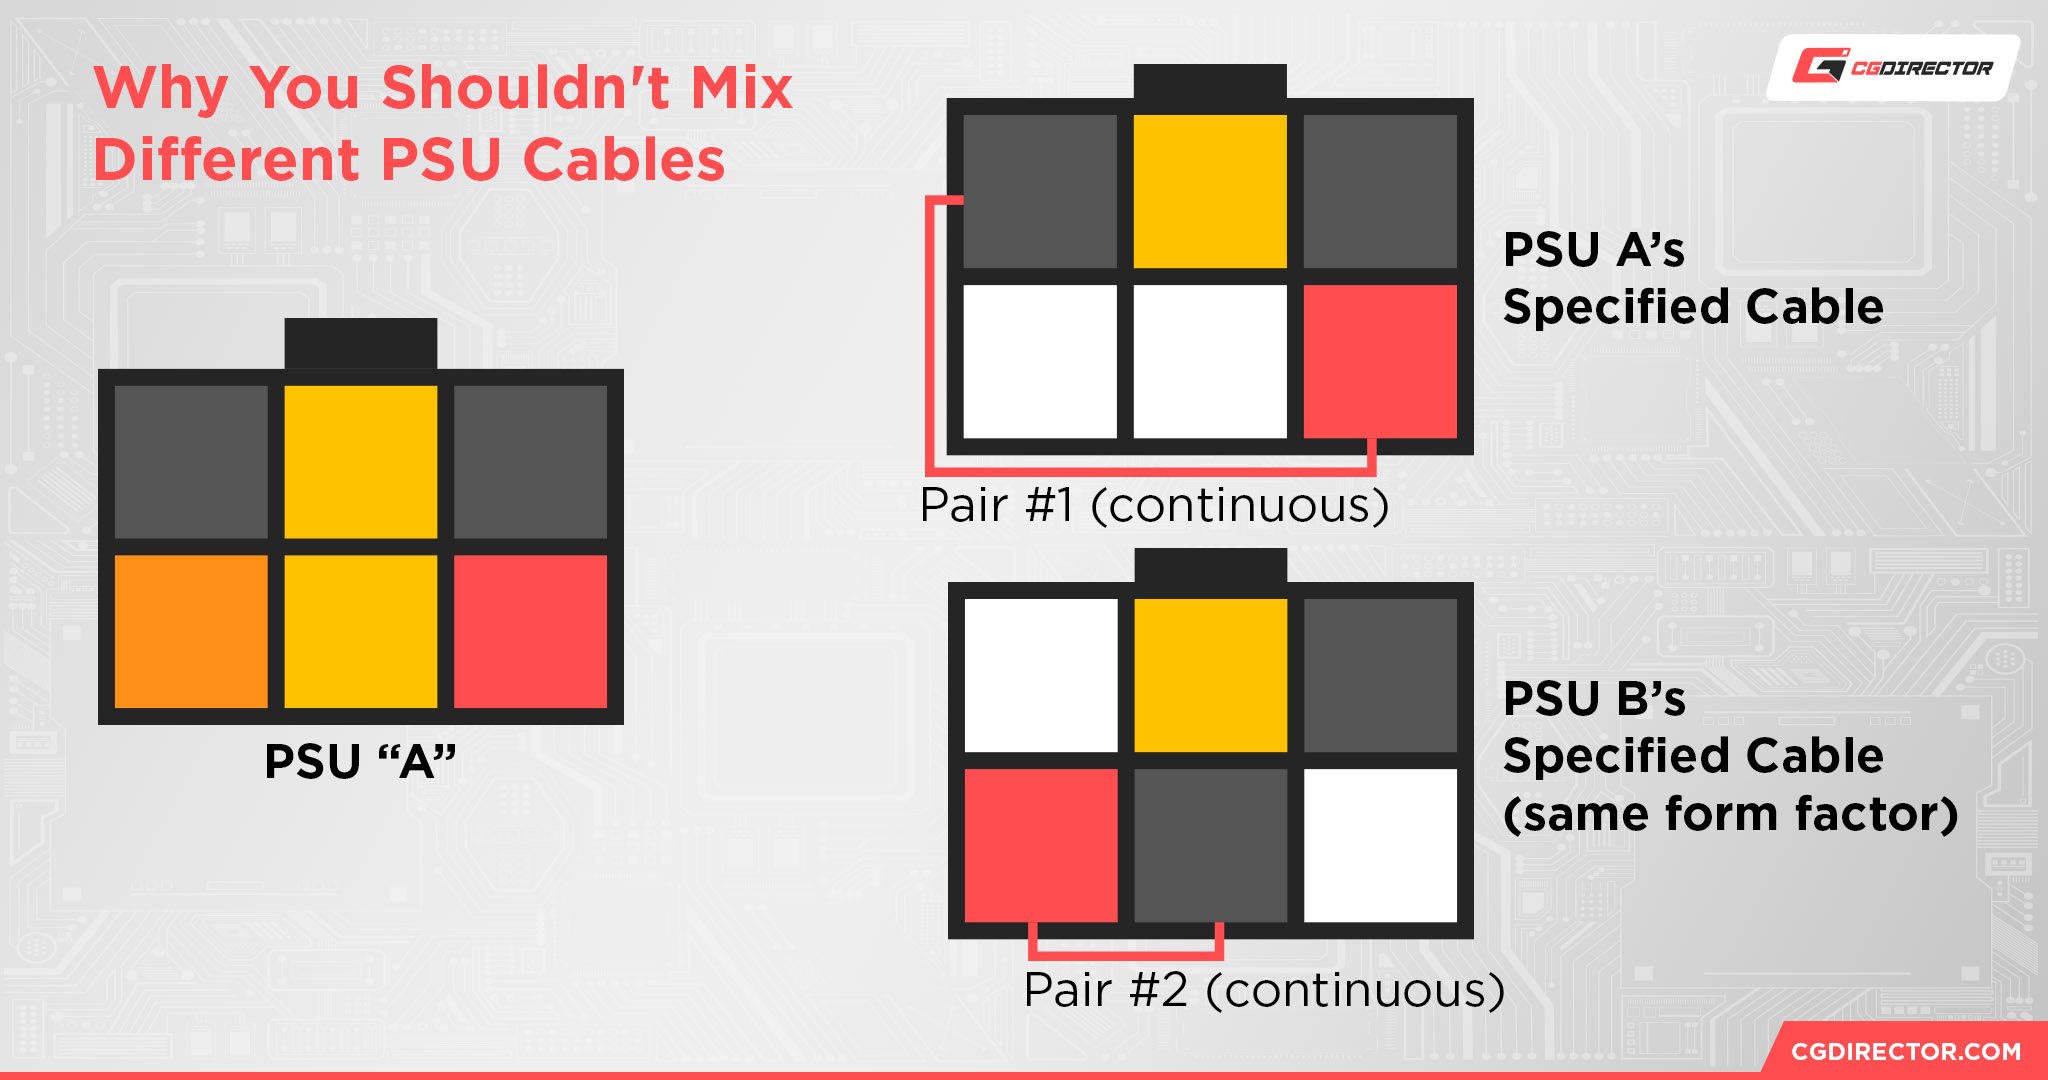 Why you shouldn't mix different PSU cables